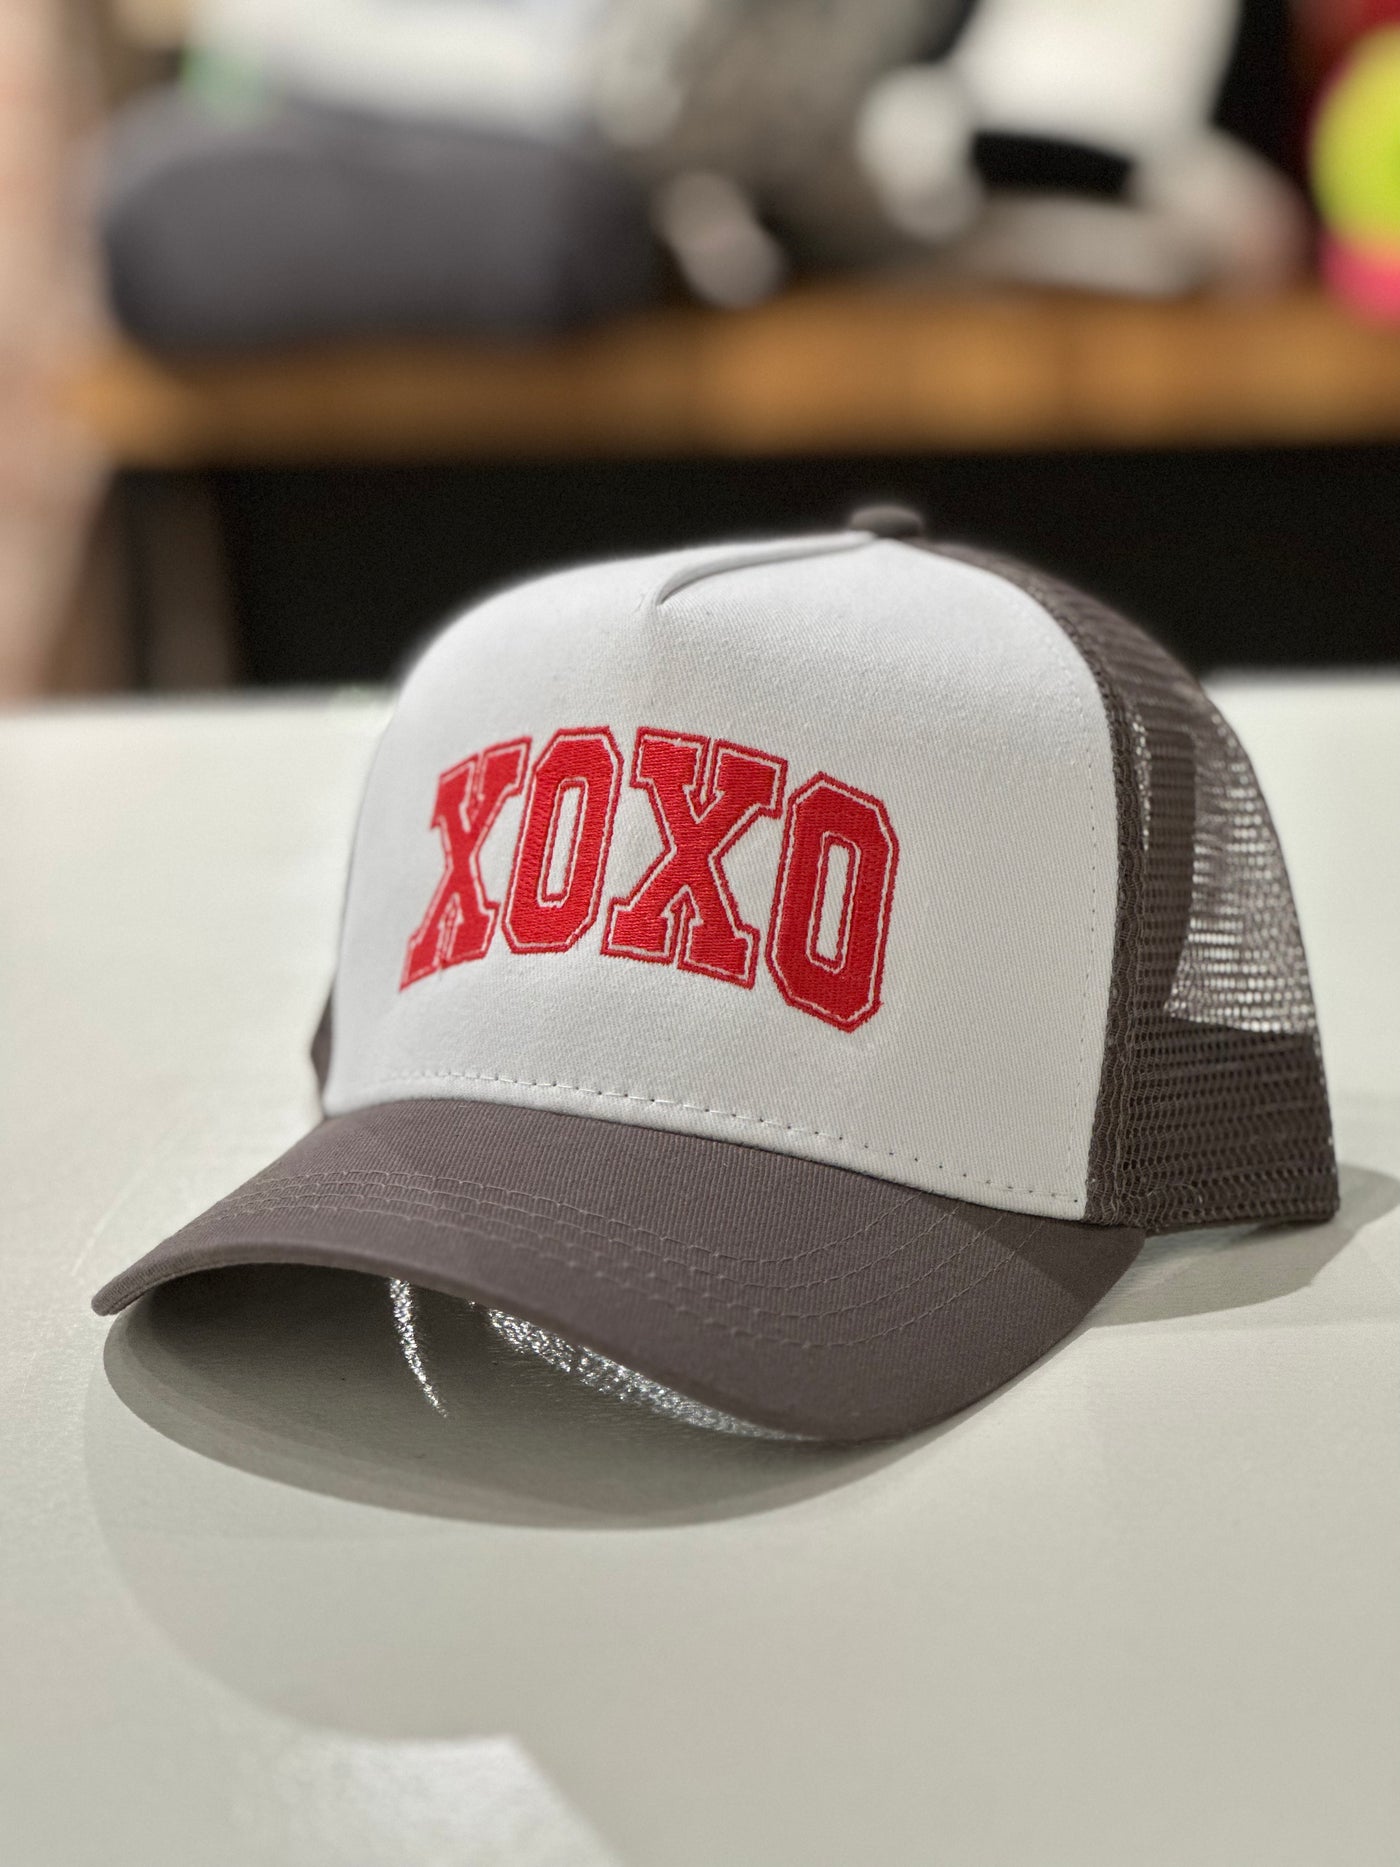 XOXO RED HAT